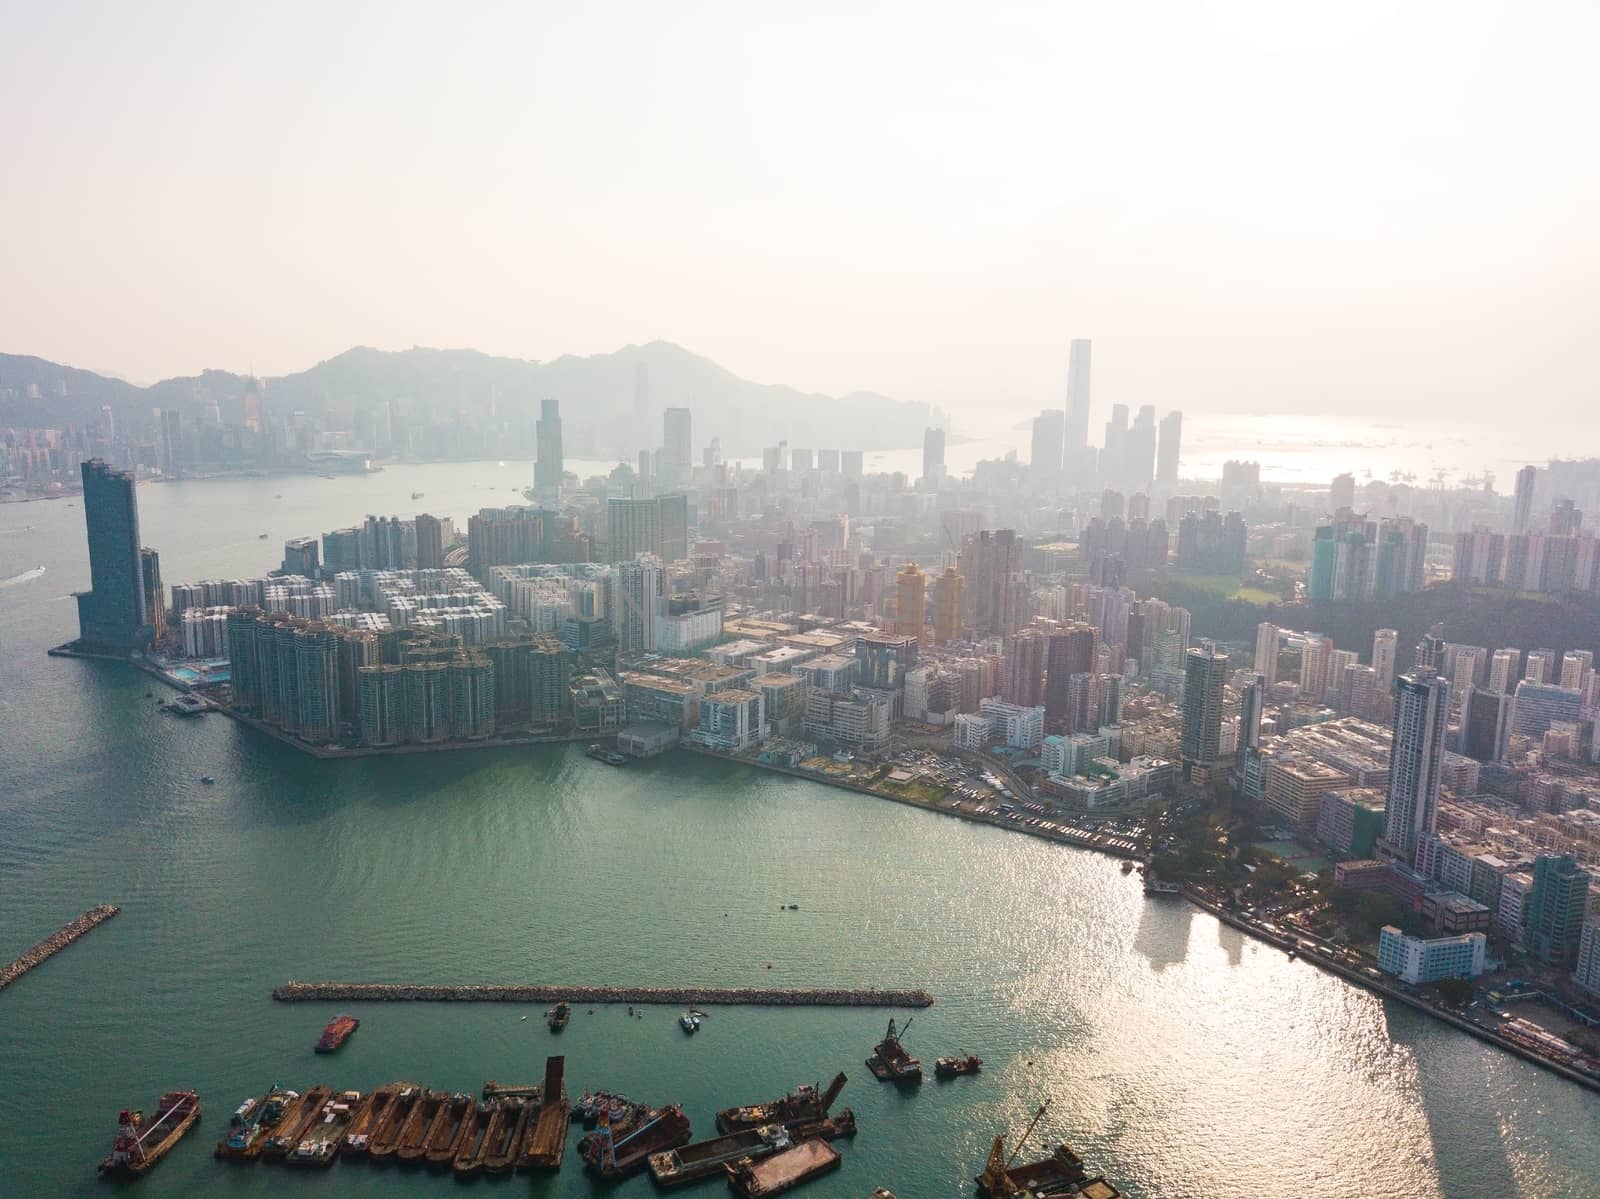 Hong Kong City at aerial view in the sky by cozyta